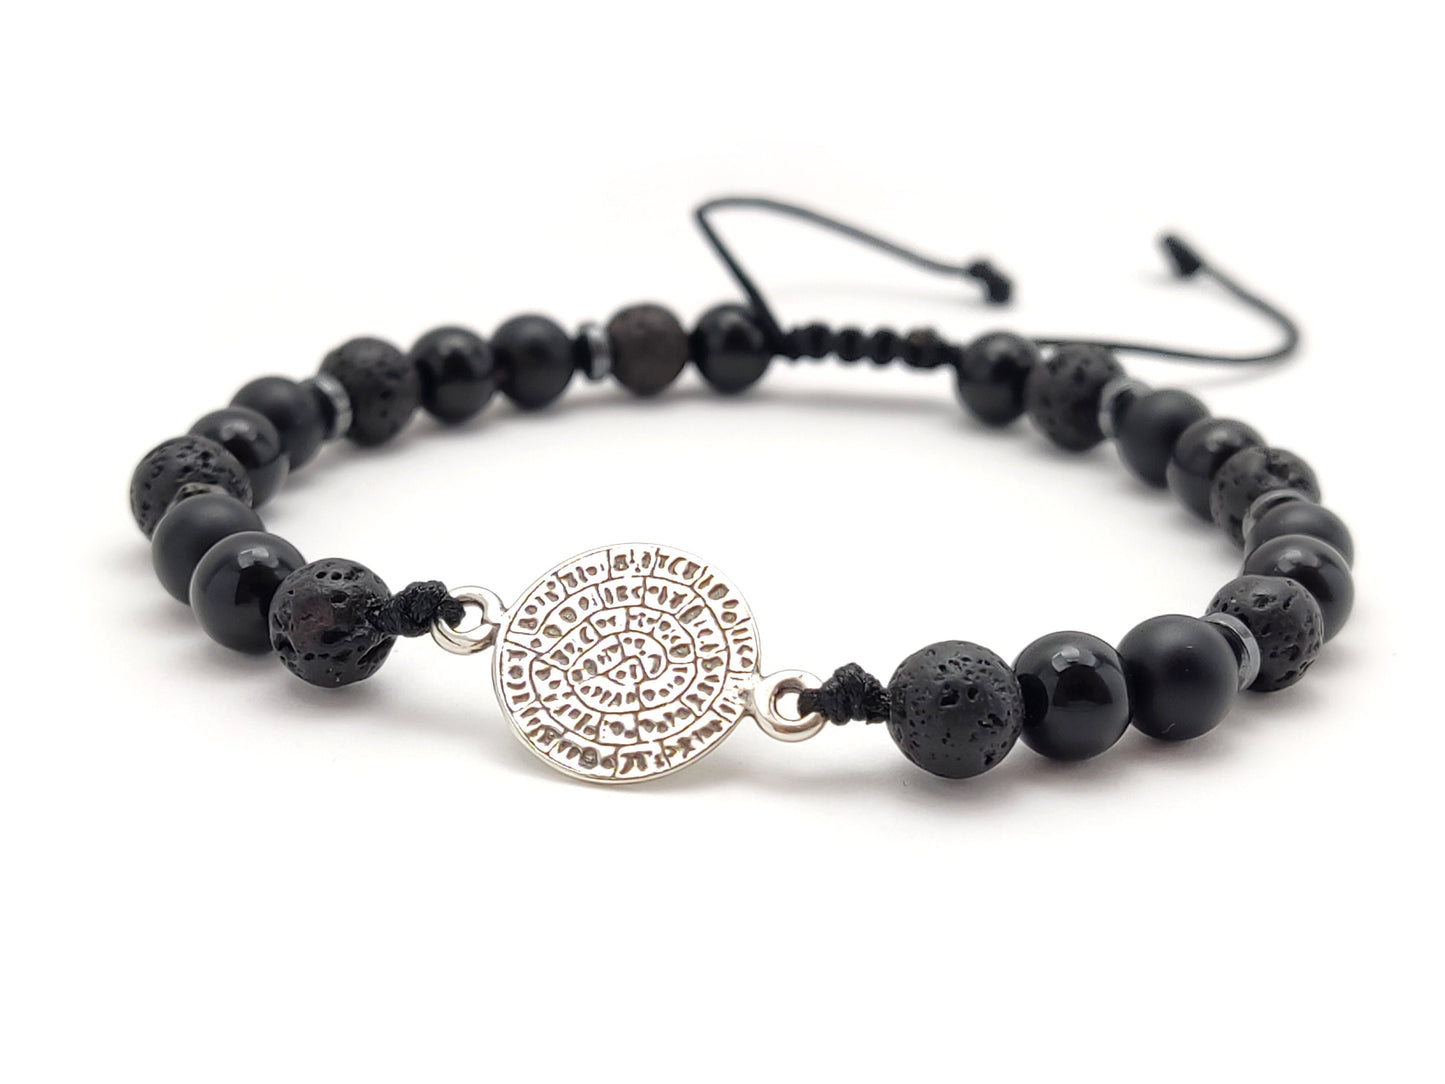 Sterling Silver 925 Phaistos Disc Bracelet Made With Lava And Onyx Stones, Volcanic Lava From Santorini Greece, Bijoux De Grece,